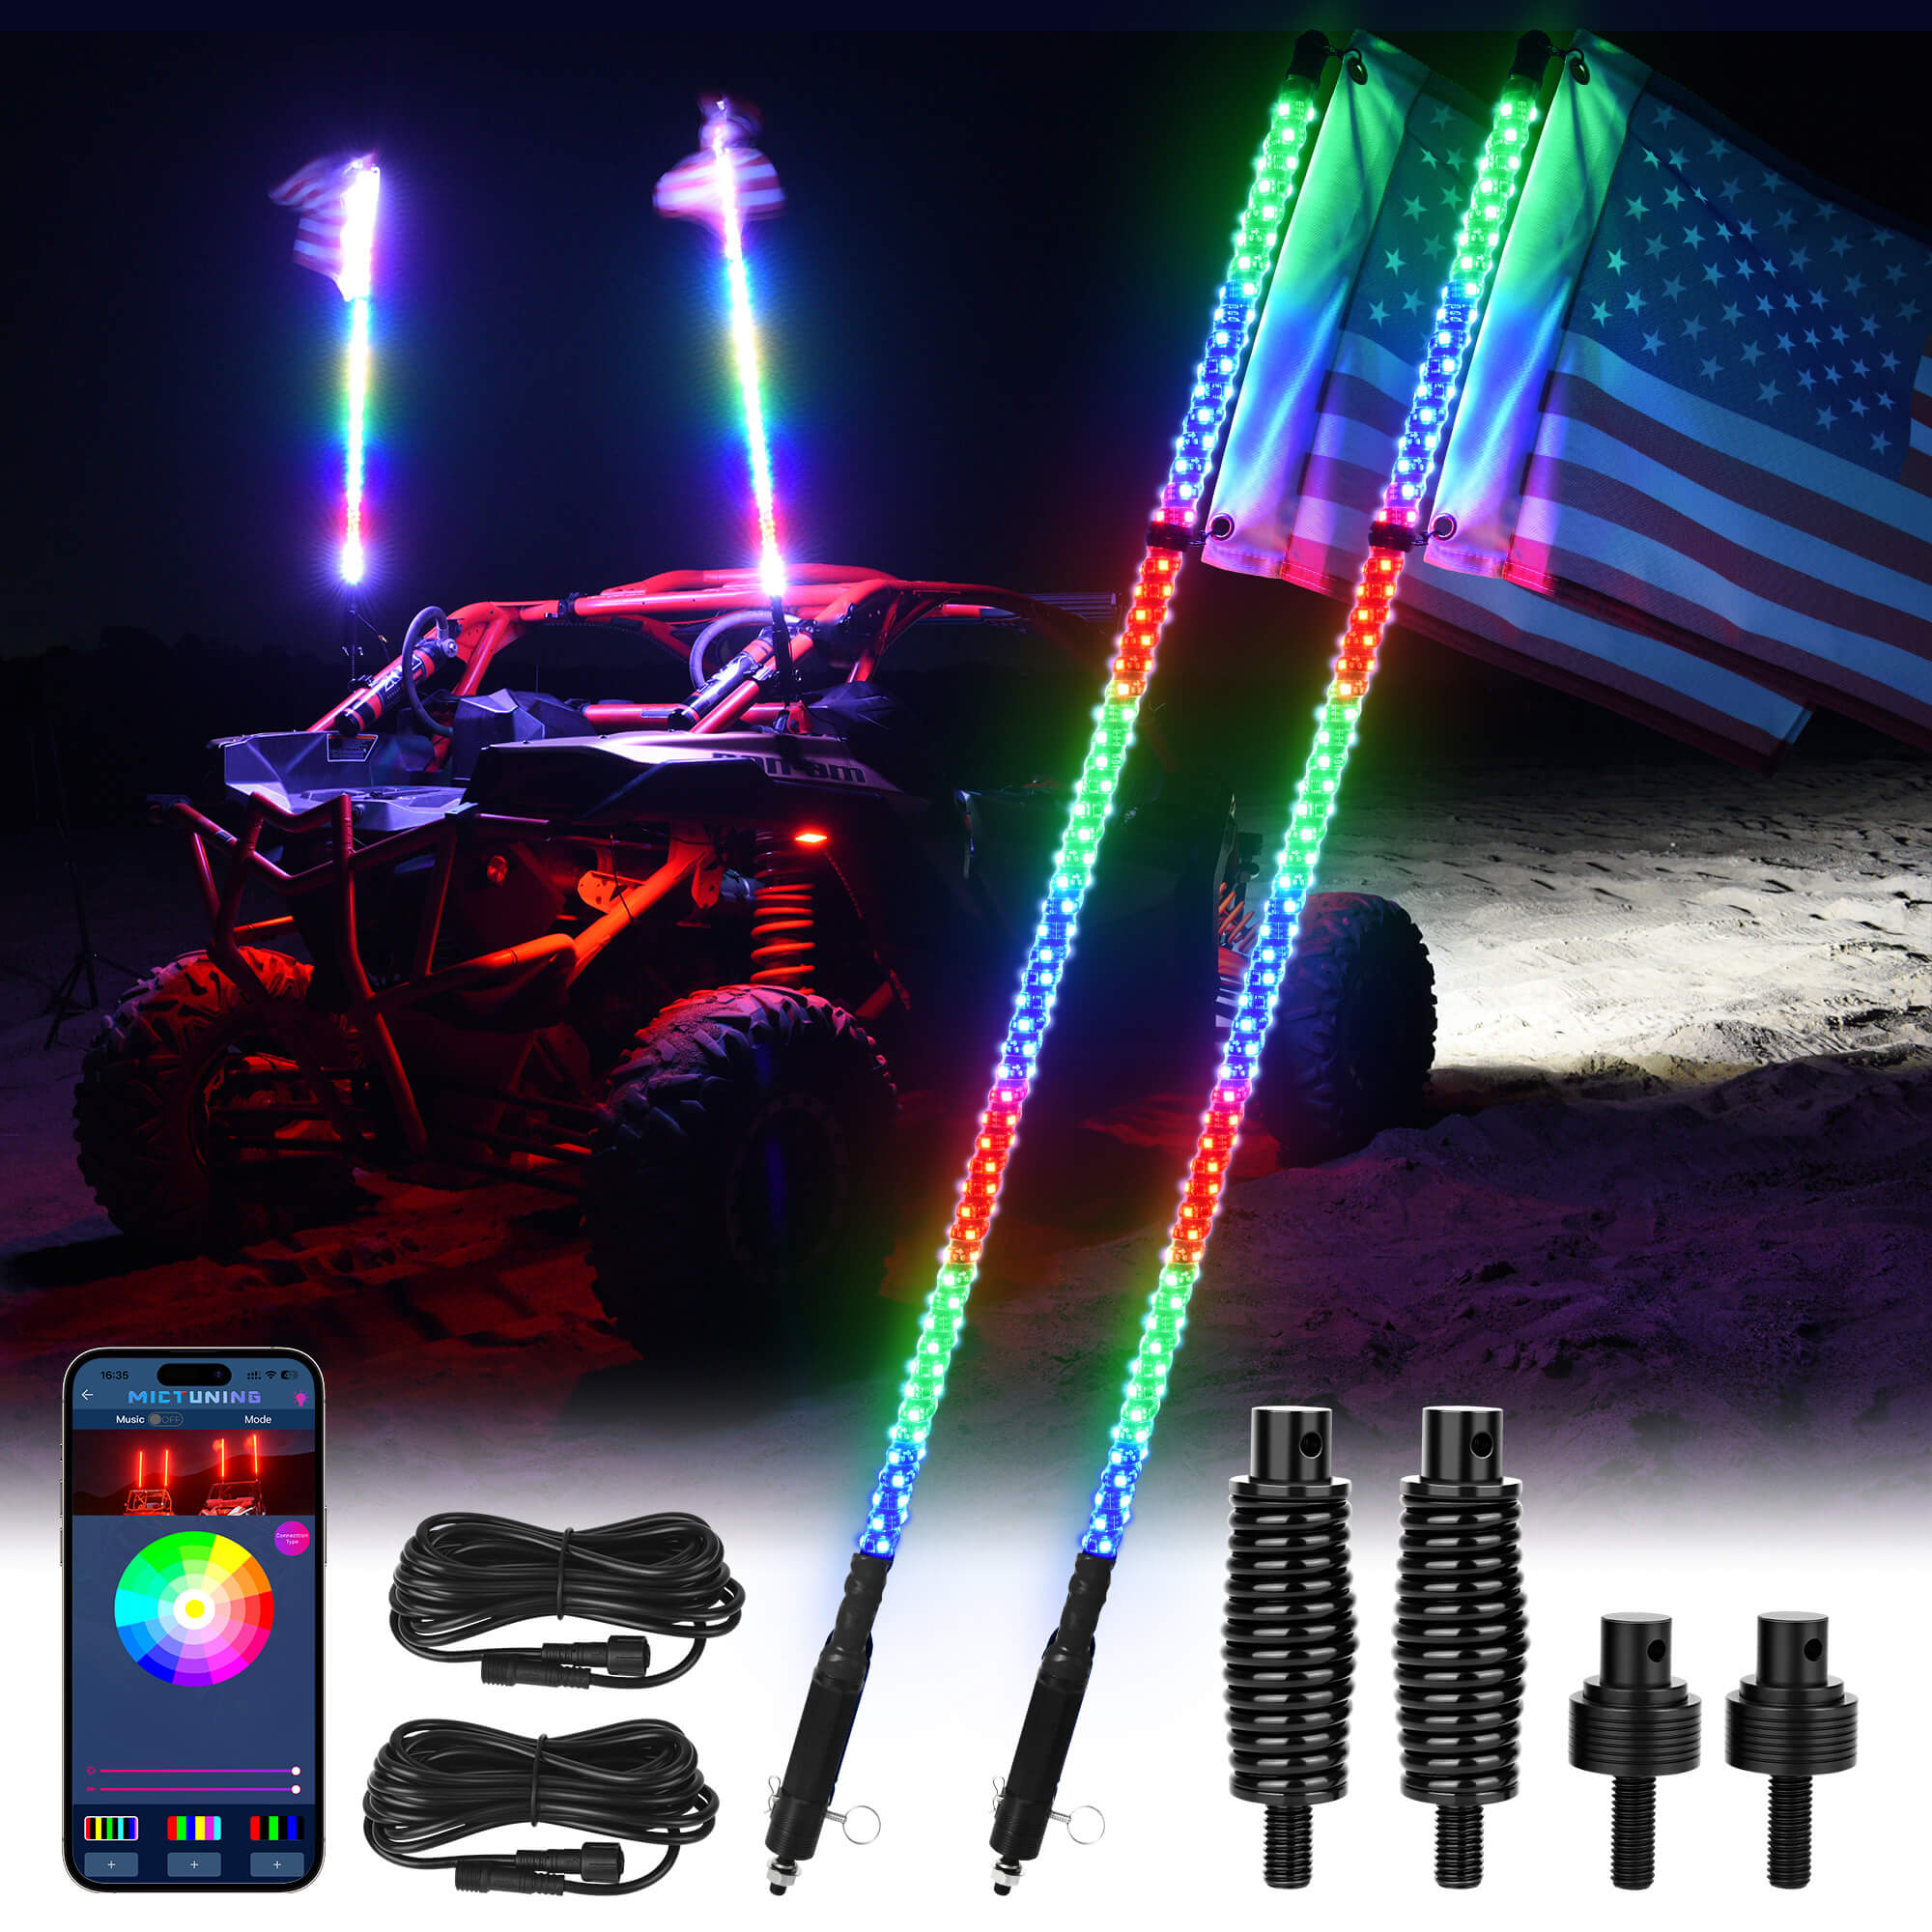 3FT/4FT LED Whip Lights 2pcs - Spiral Bendable RGB Chasing Color Antenna Whips - Bluetooth App Control